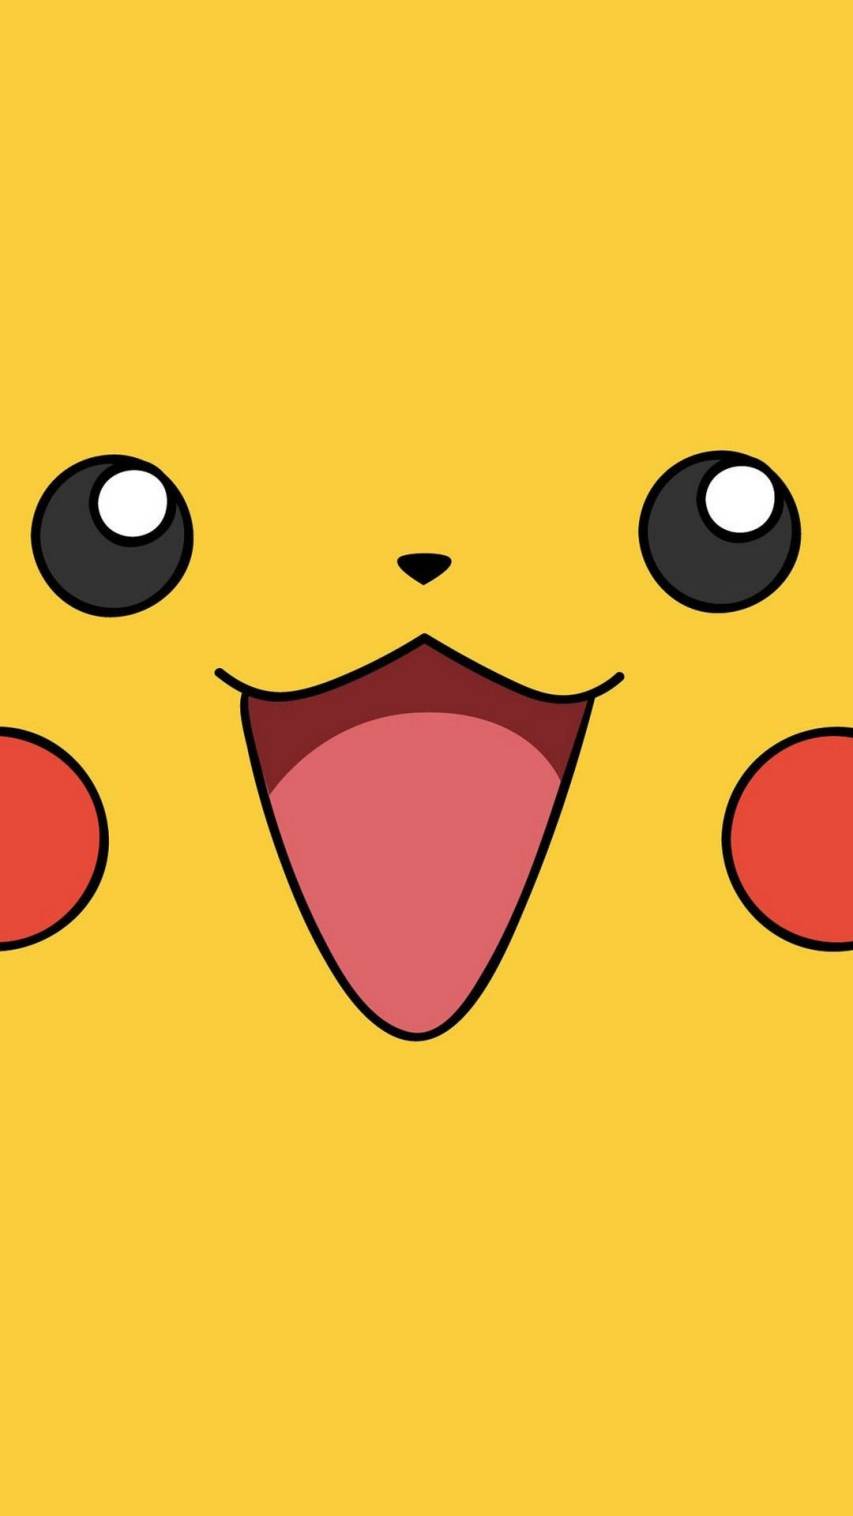 Simple Pokemon Wallpapers for iPhone